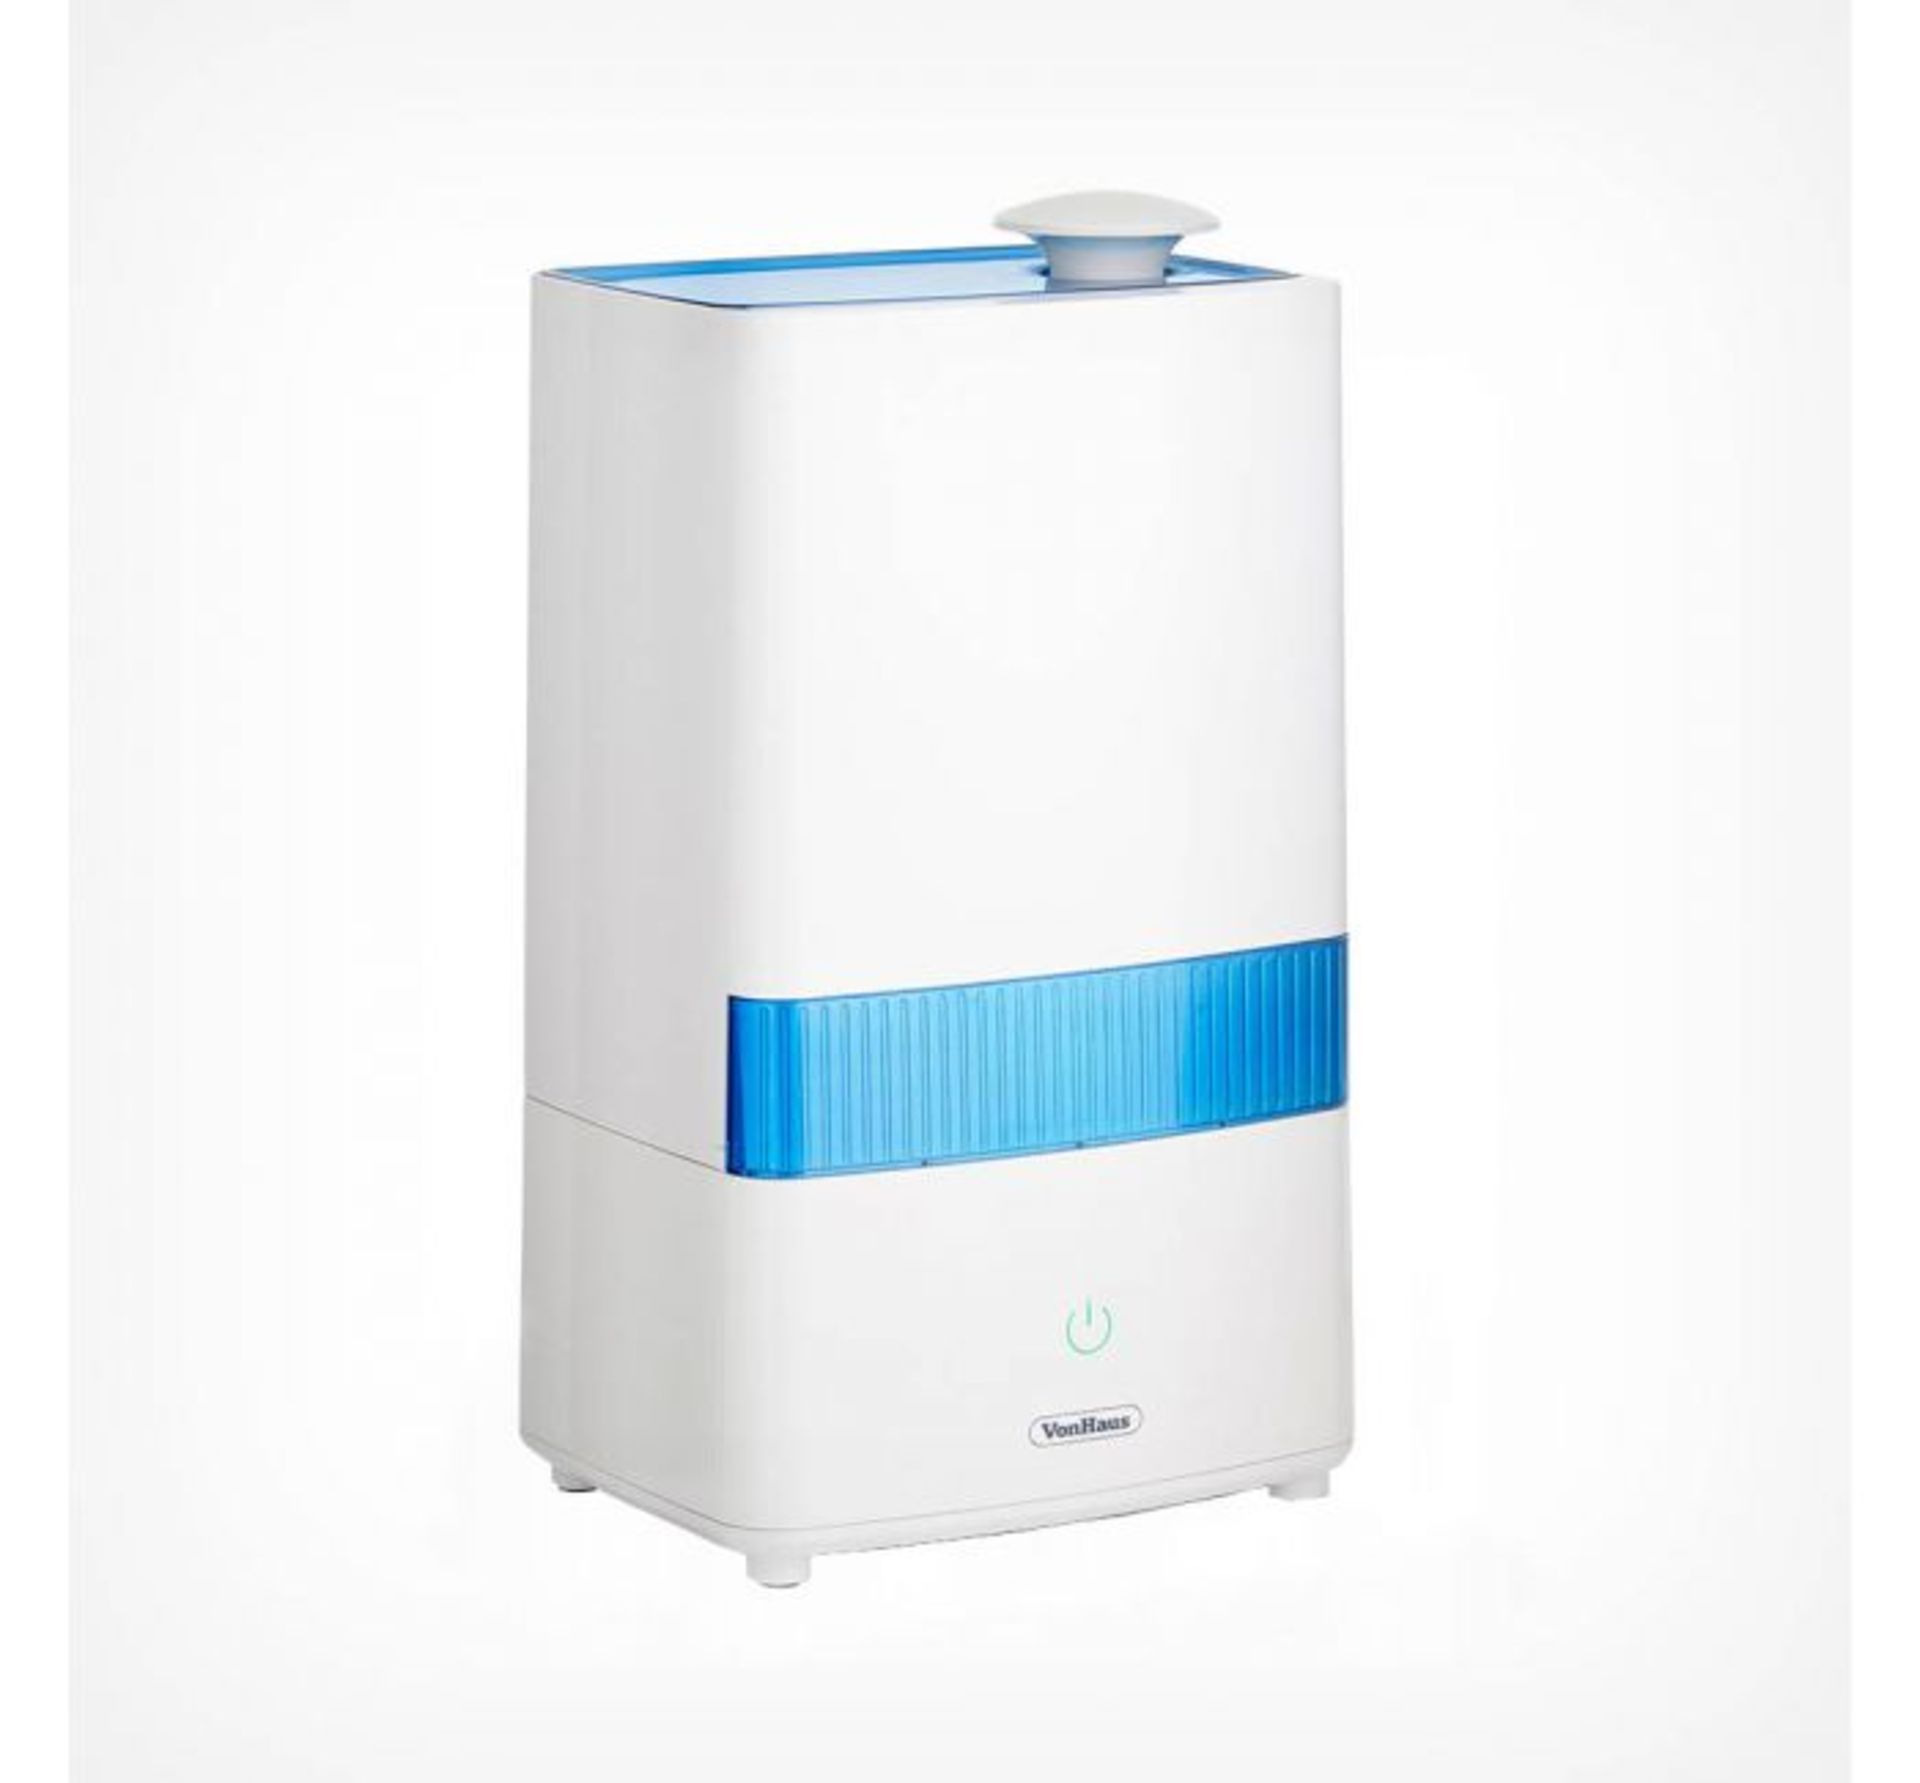 (LT20) 4.5L Humidifier Easy to use with simple touch panel Low, medium and high mist adjustme... - Image 2 of 3